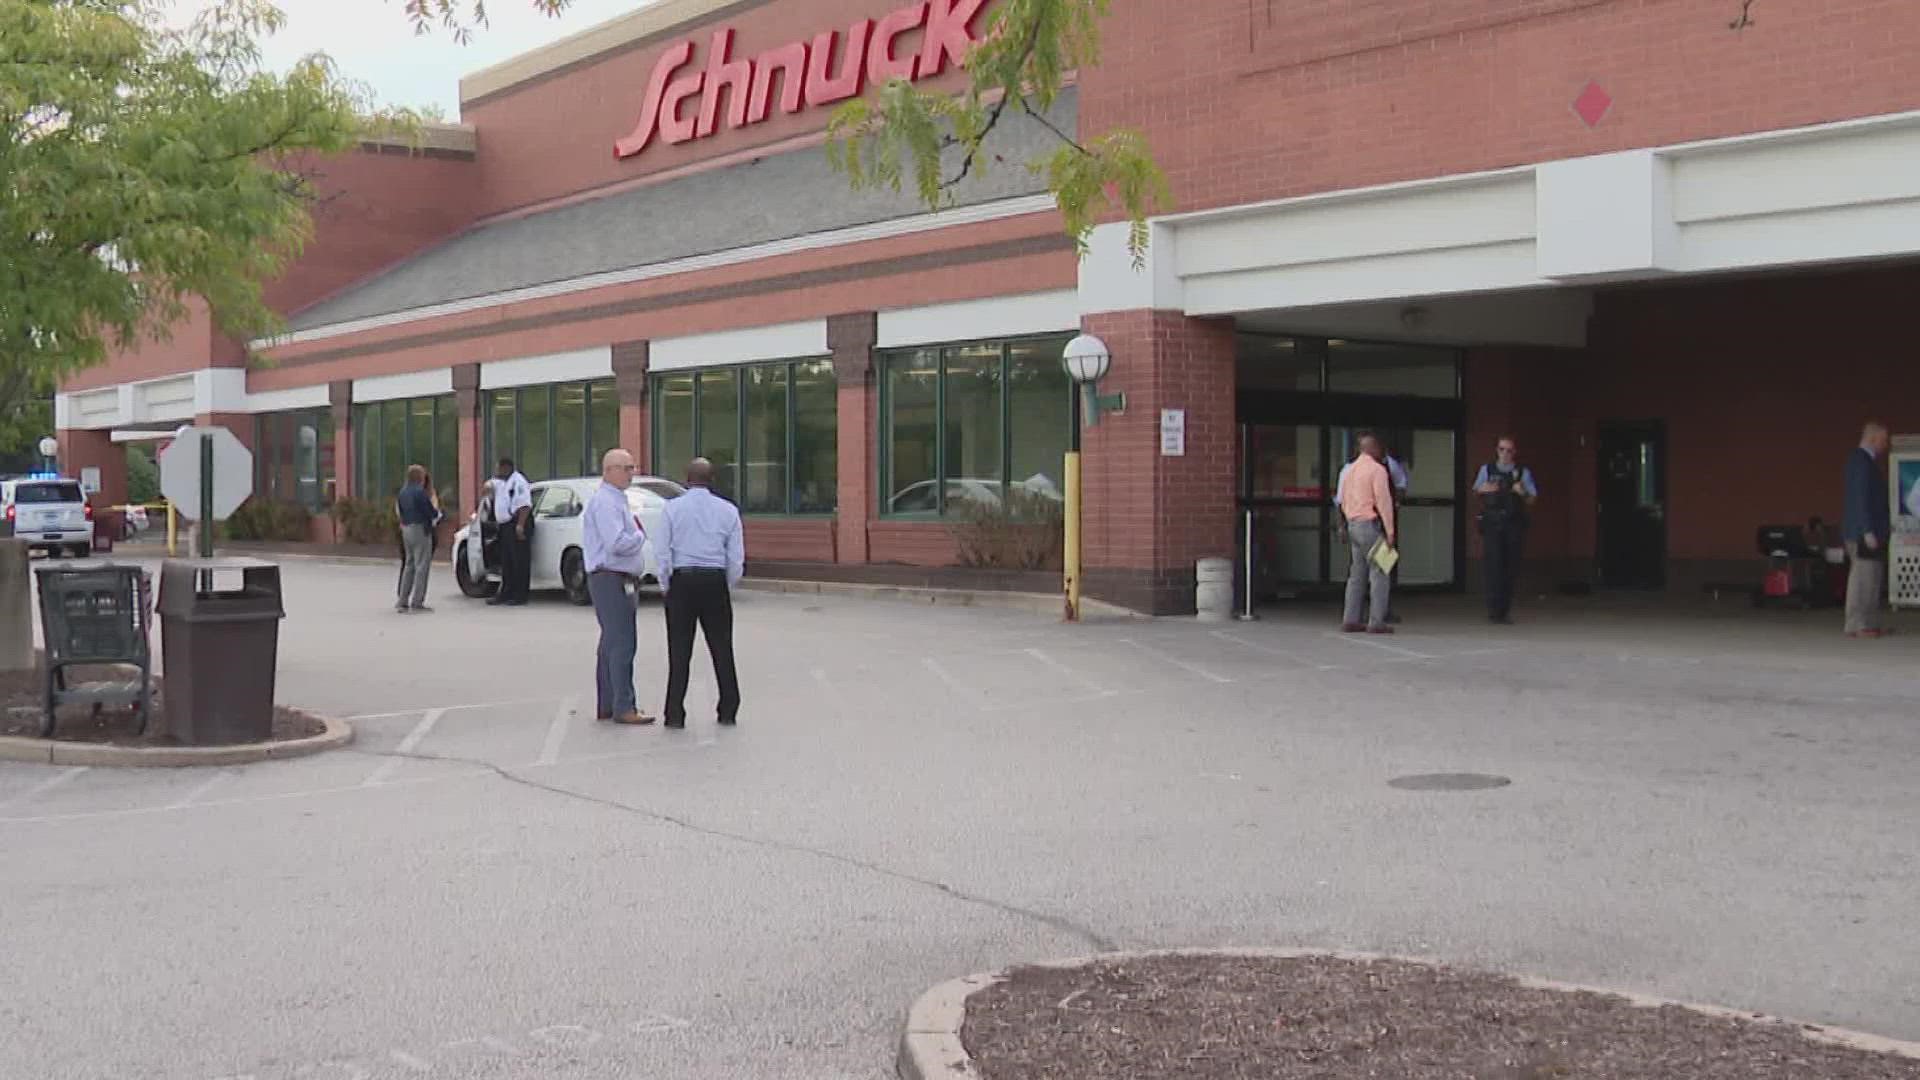 Security officer shoots disorderly man inside Schnucks Grocery Store